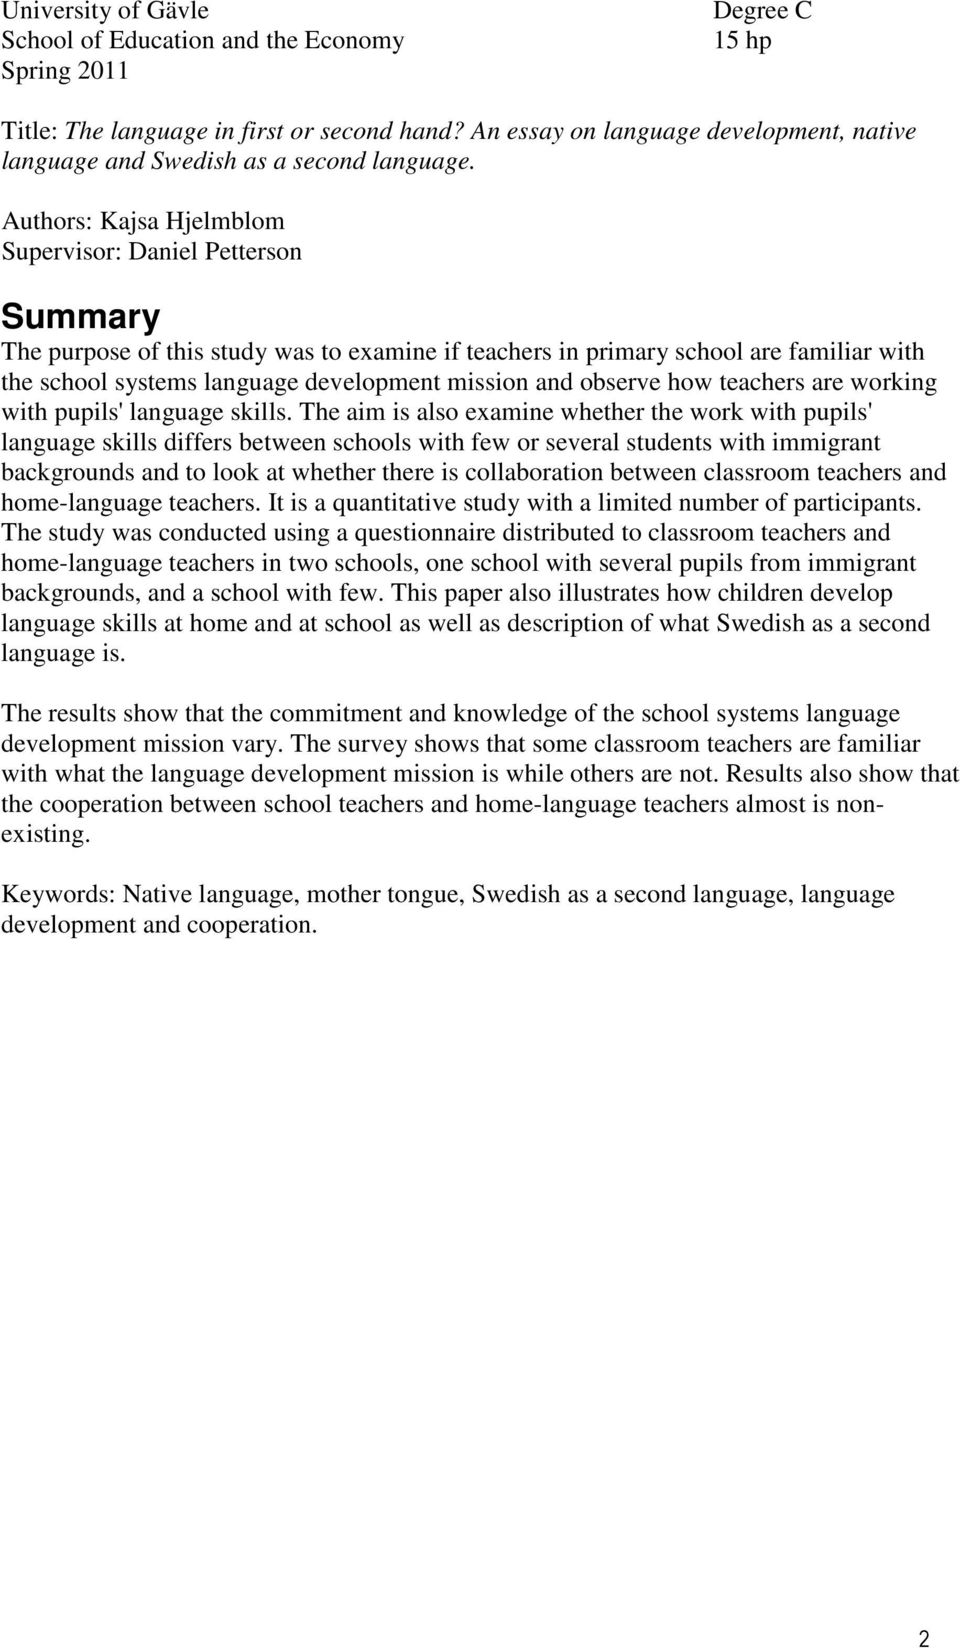 Authors: Kajsa Hjelmblom Supervisor: Daniel Petterson Summary The purpose of this study was to examine if teachers in primary school are familiar with the school systems language development mission